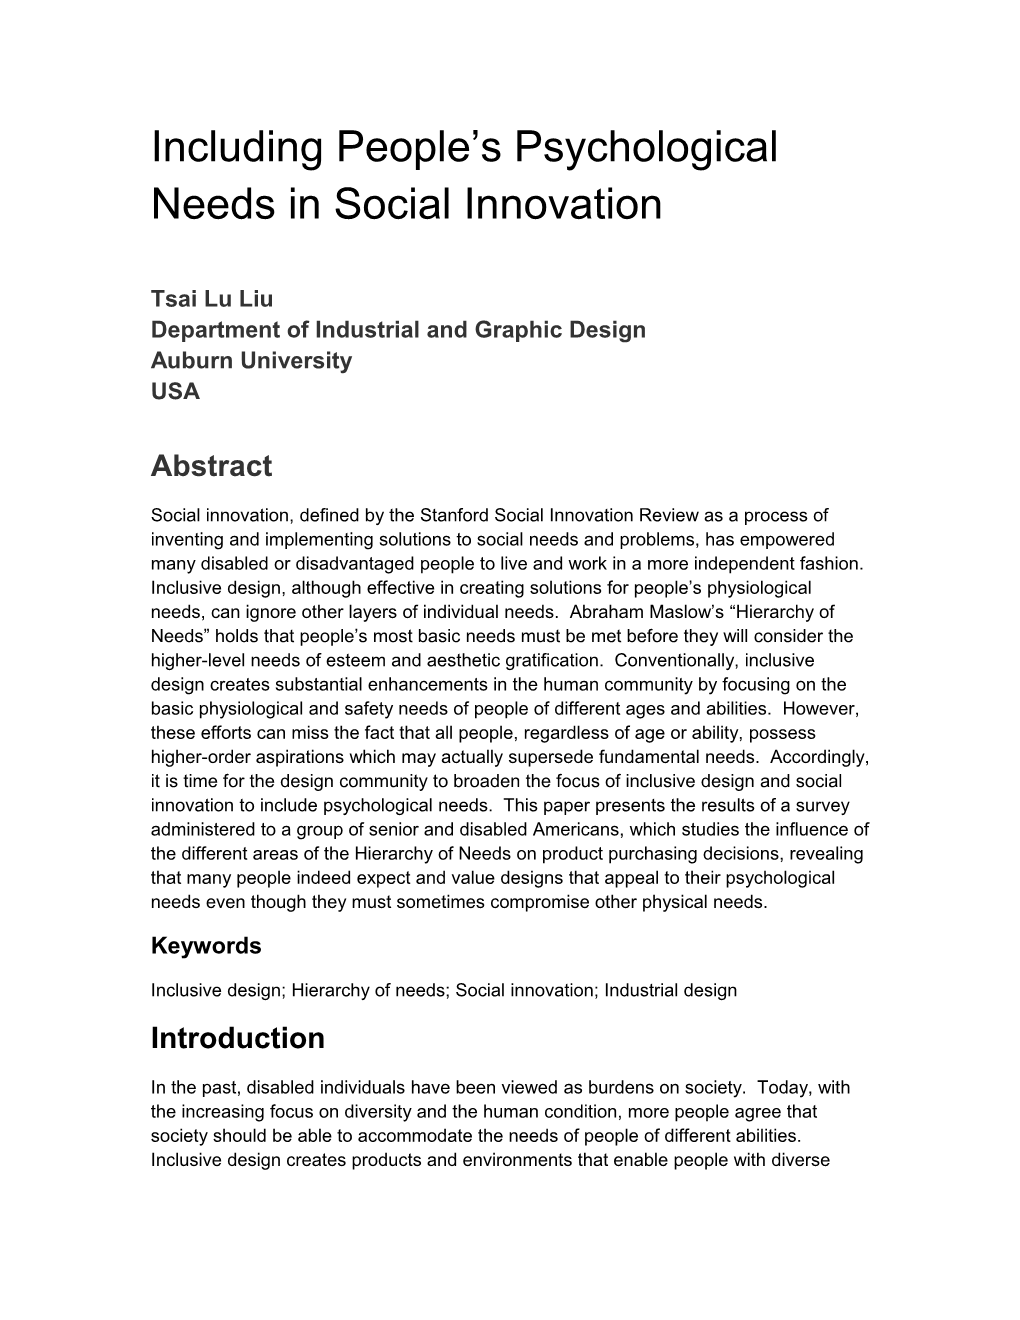 Including People S Psychological Needs in Social Innovation